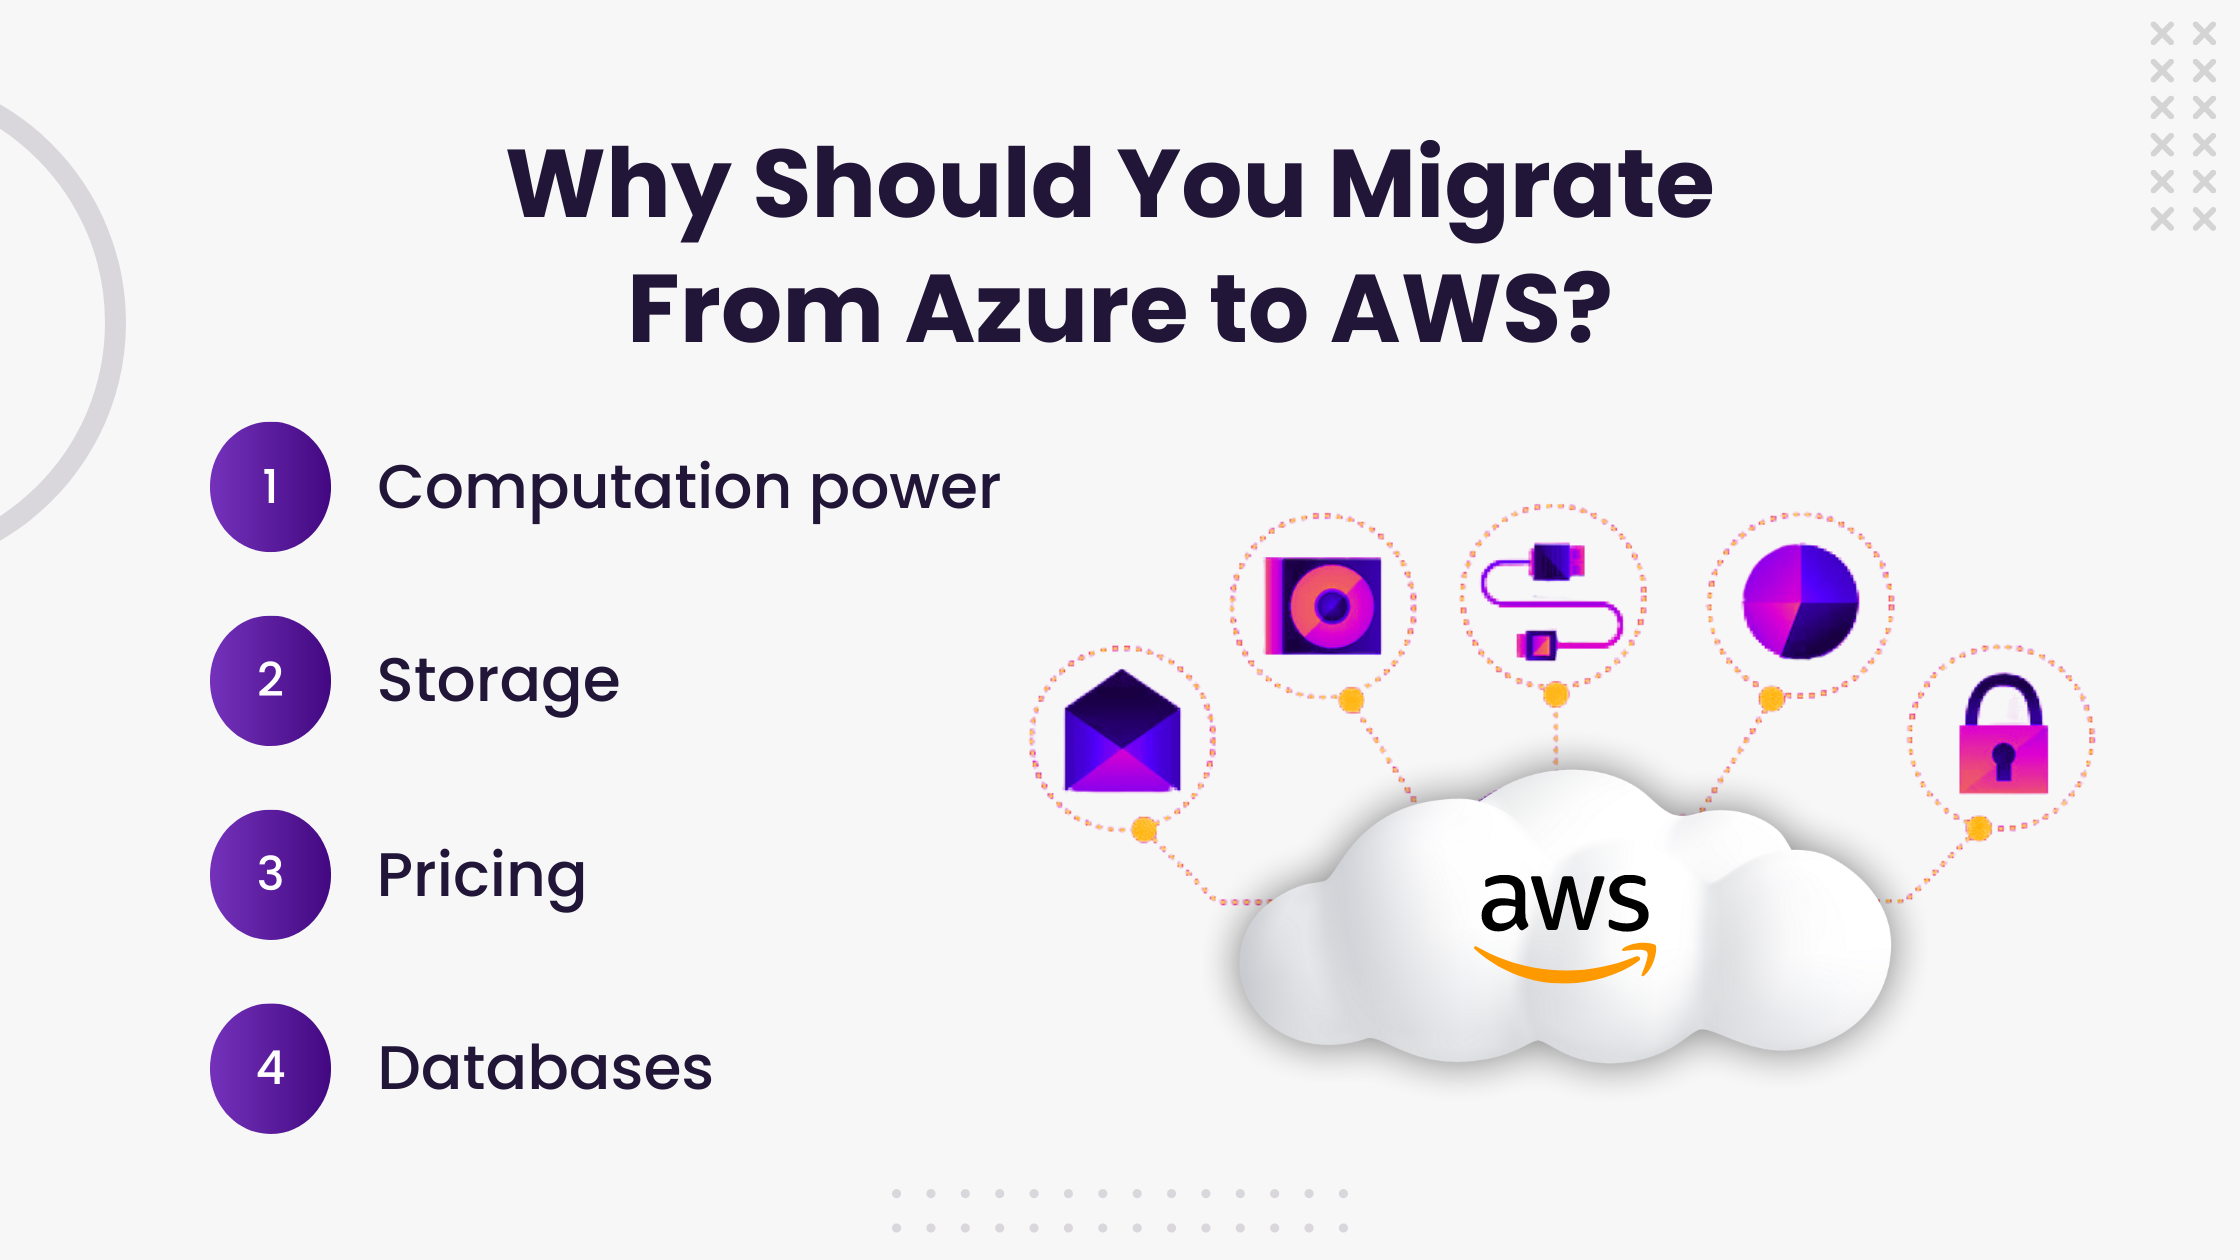 Why should you migrate from Azure to AWS